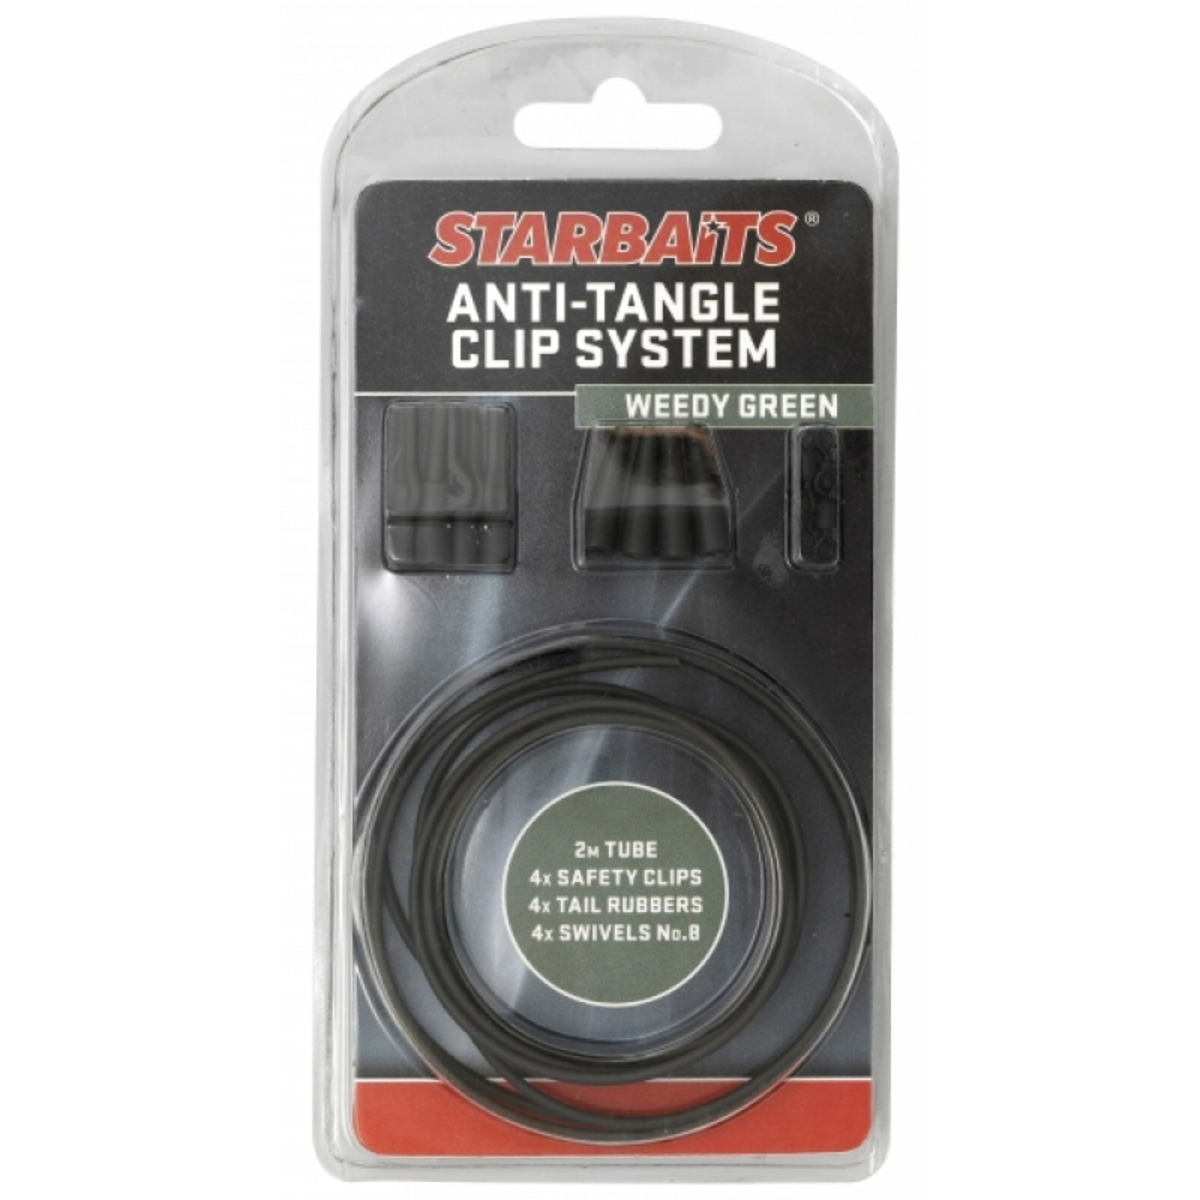 Starbaits Anti Tangle Clip System - WEEDY GREEN